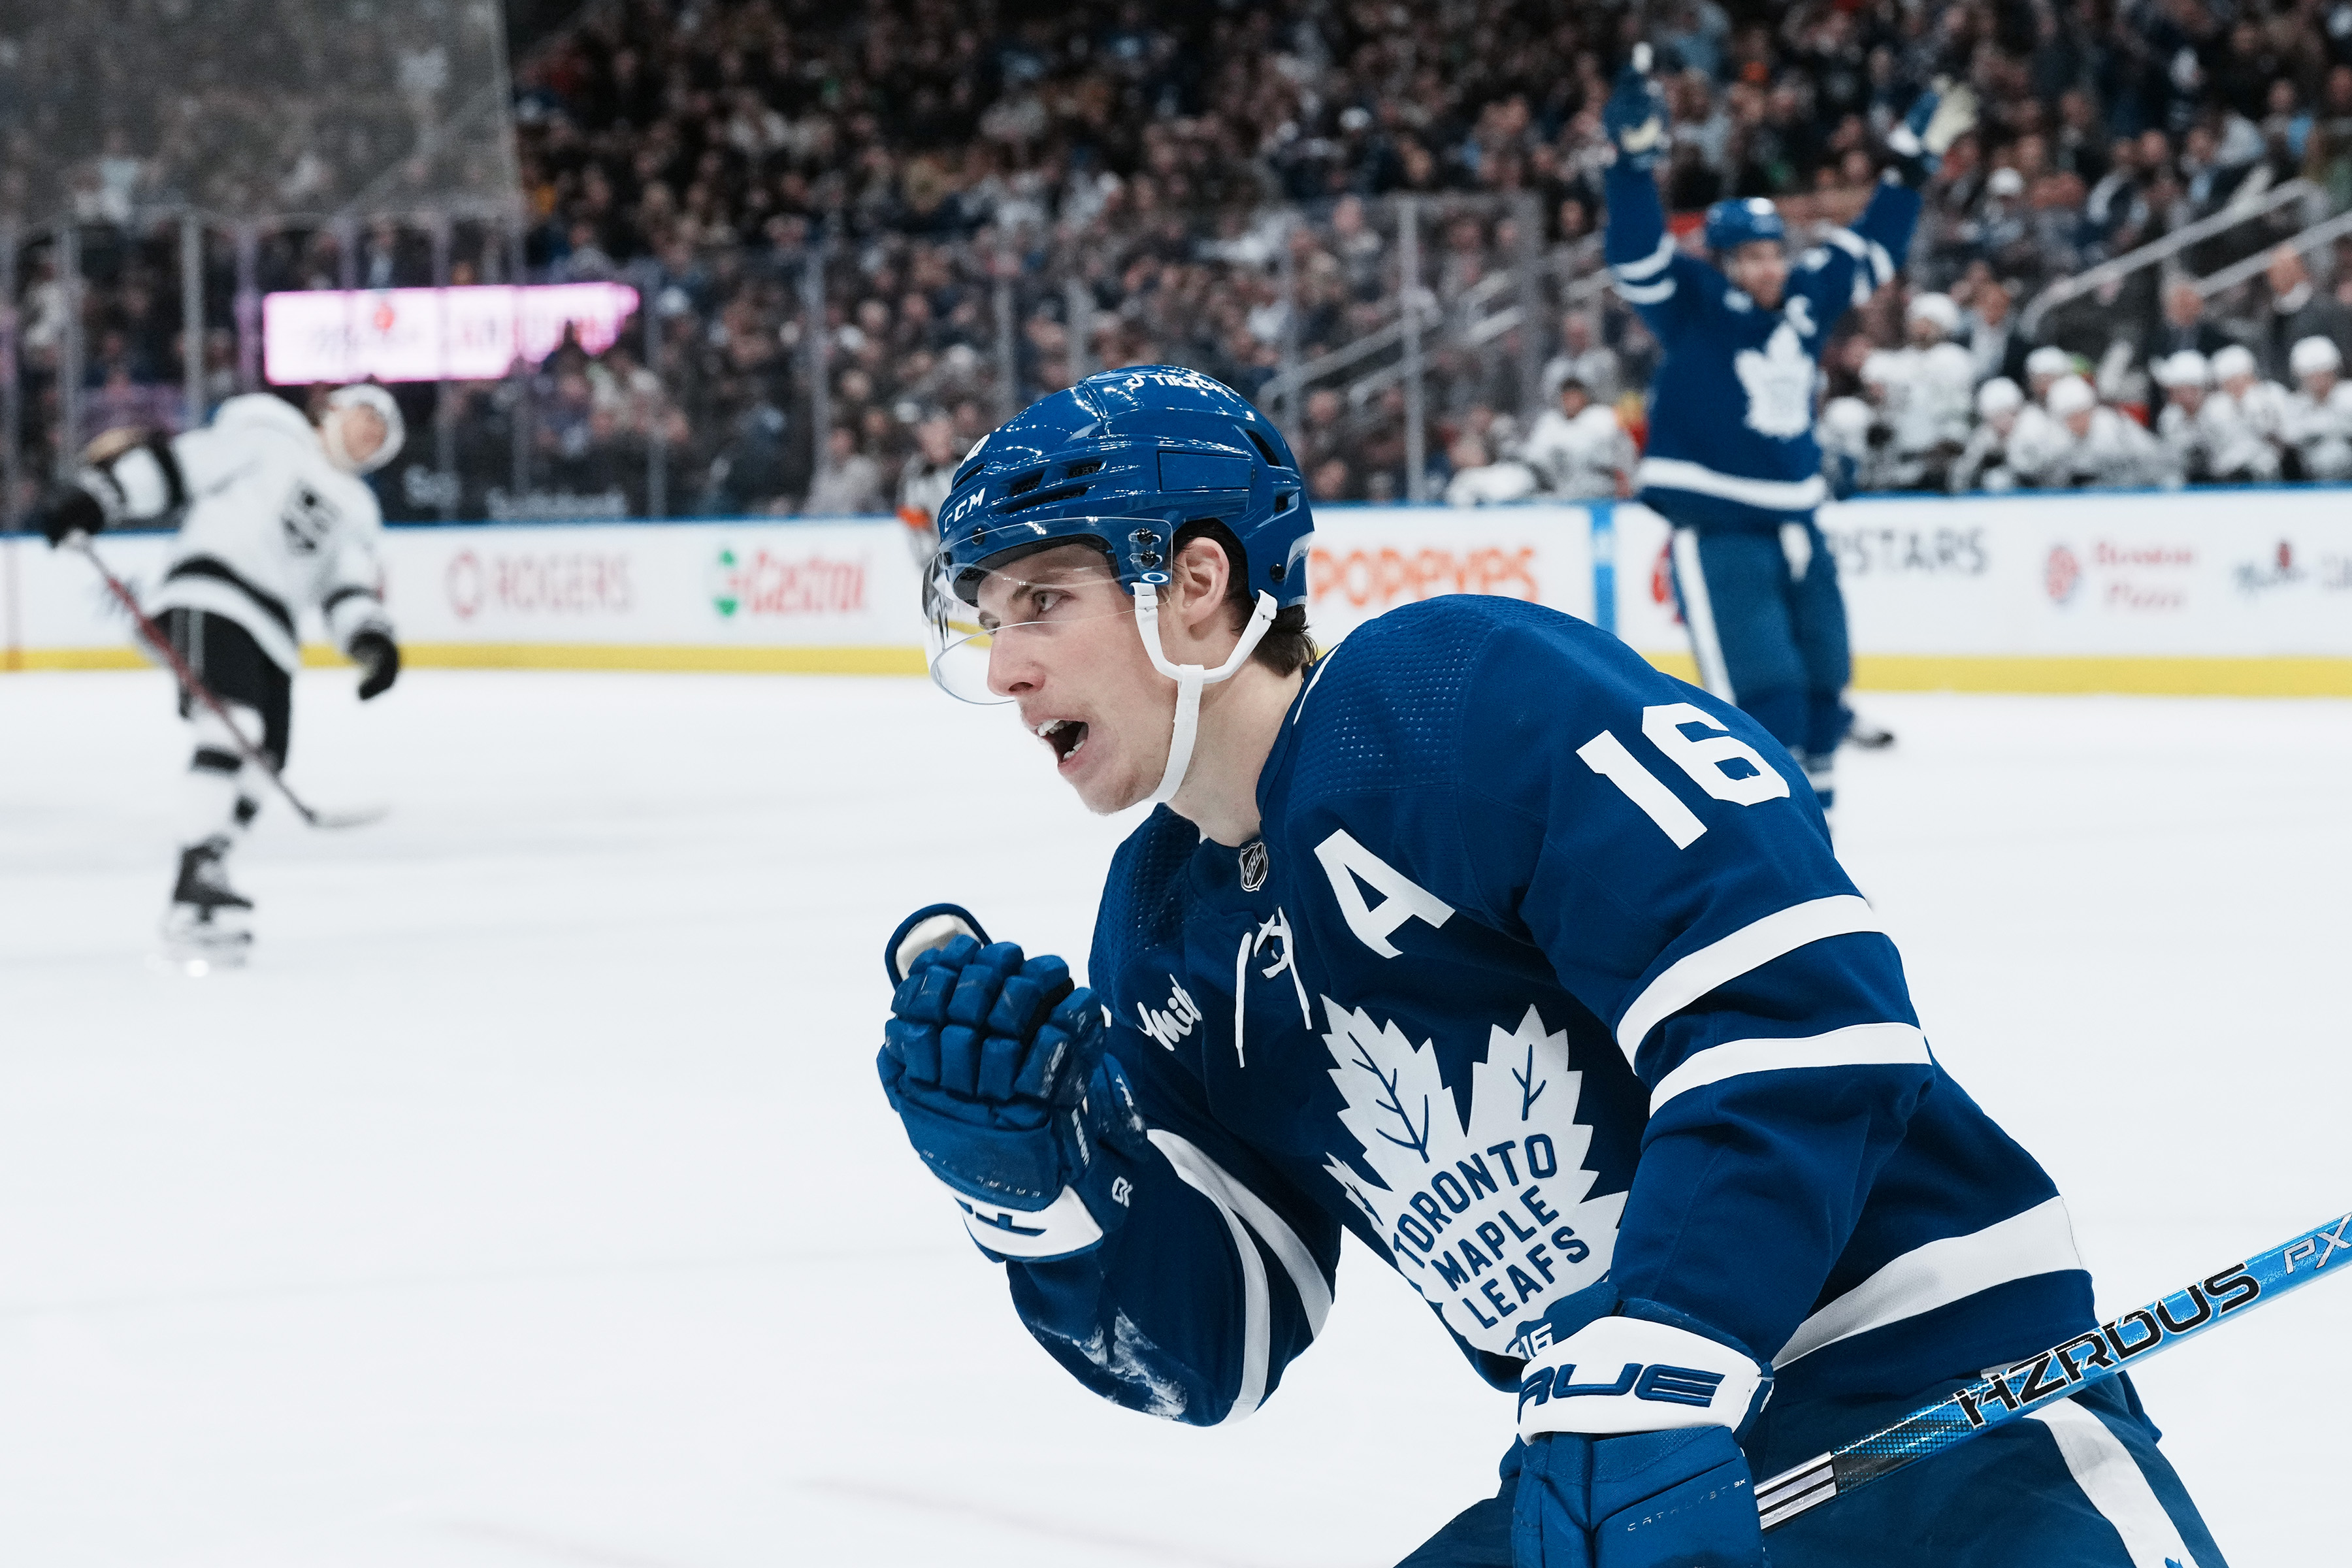 Toronto Maple Leafs] First goal feeling. Pierre Engvall with the